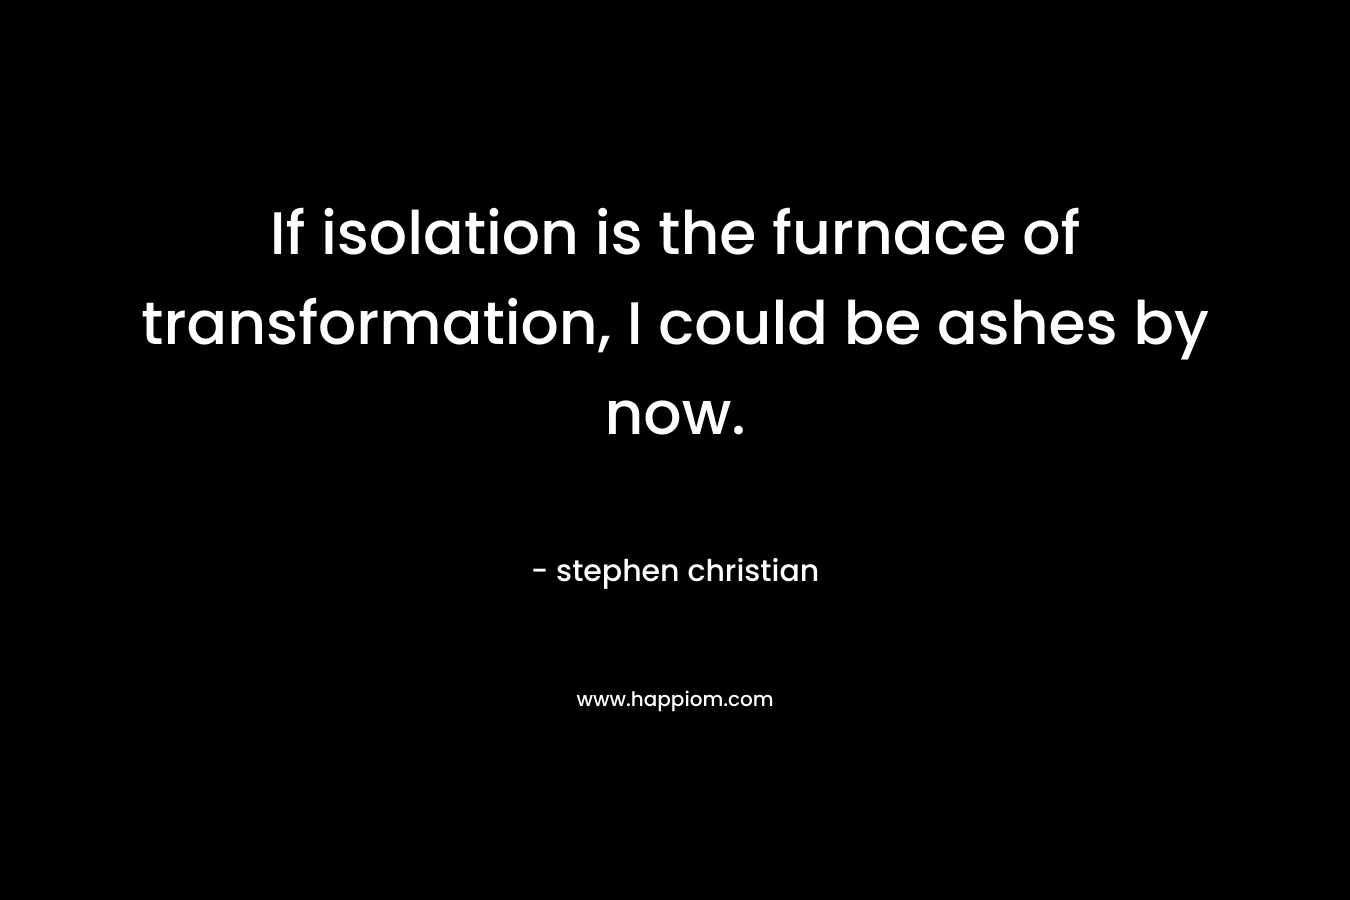 If isolation is the furnace of transformation, I could be ashes by now. – stephen christian